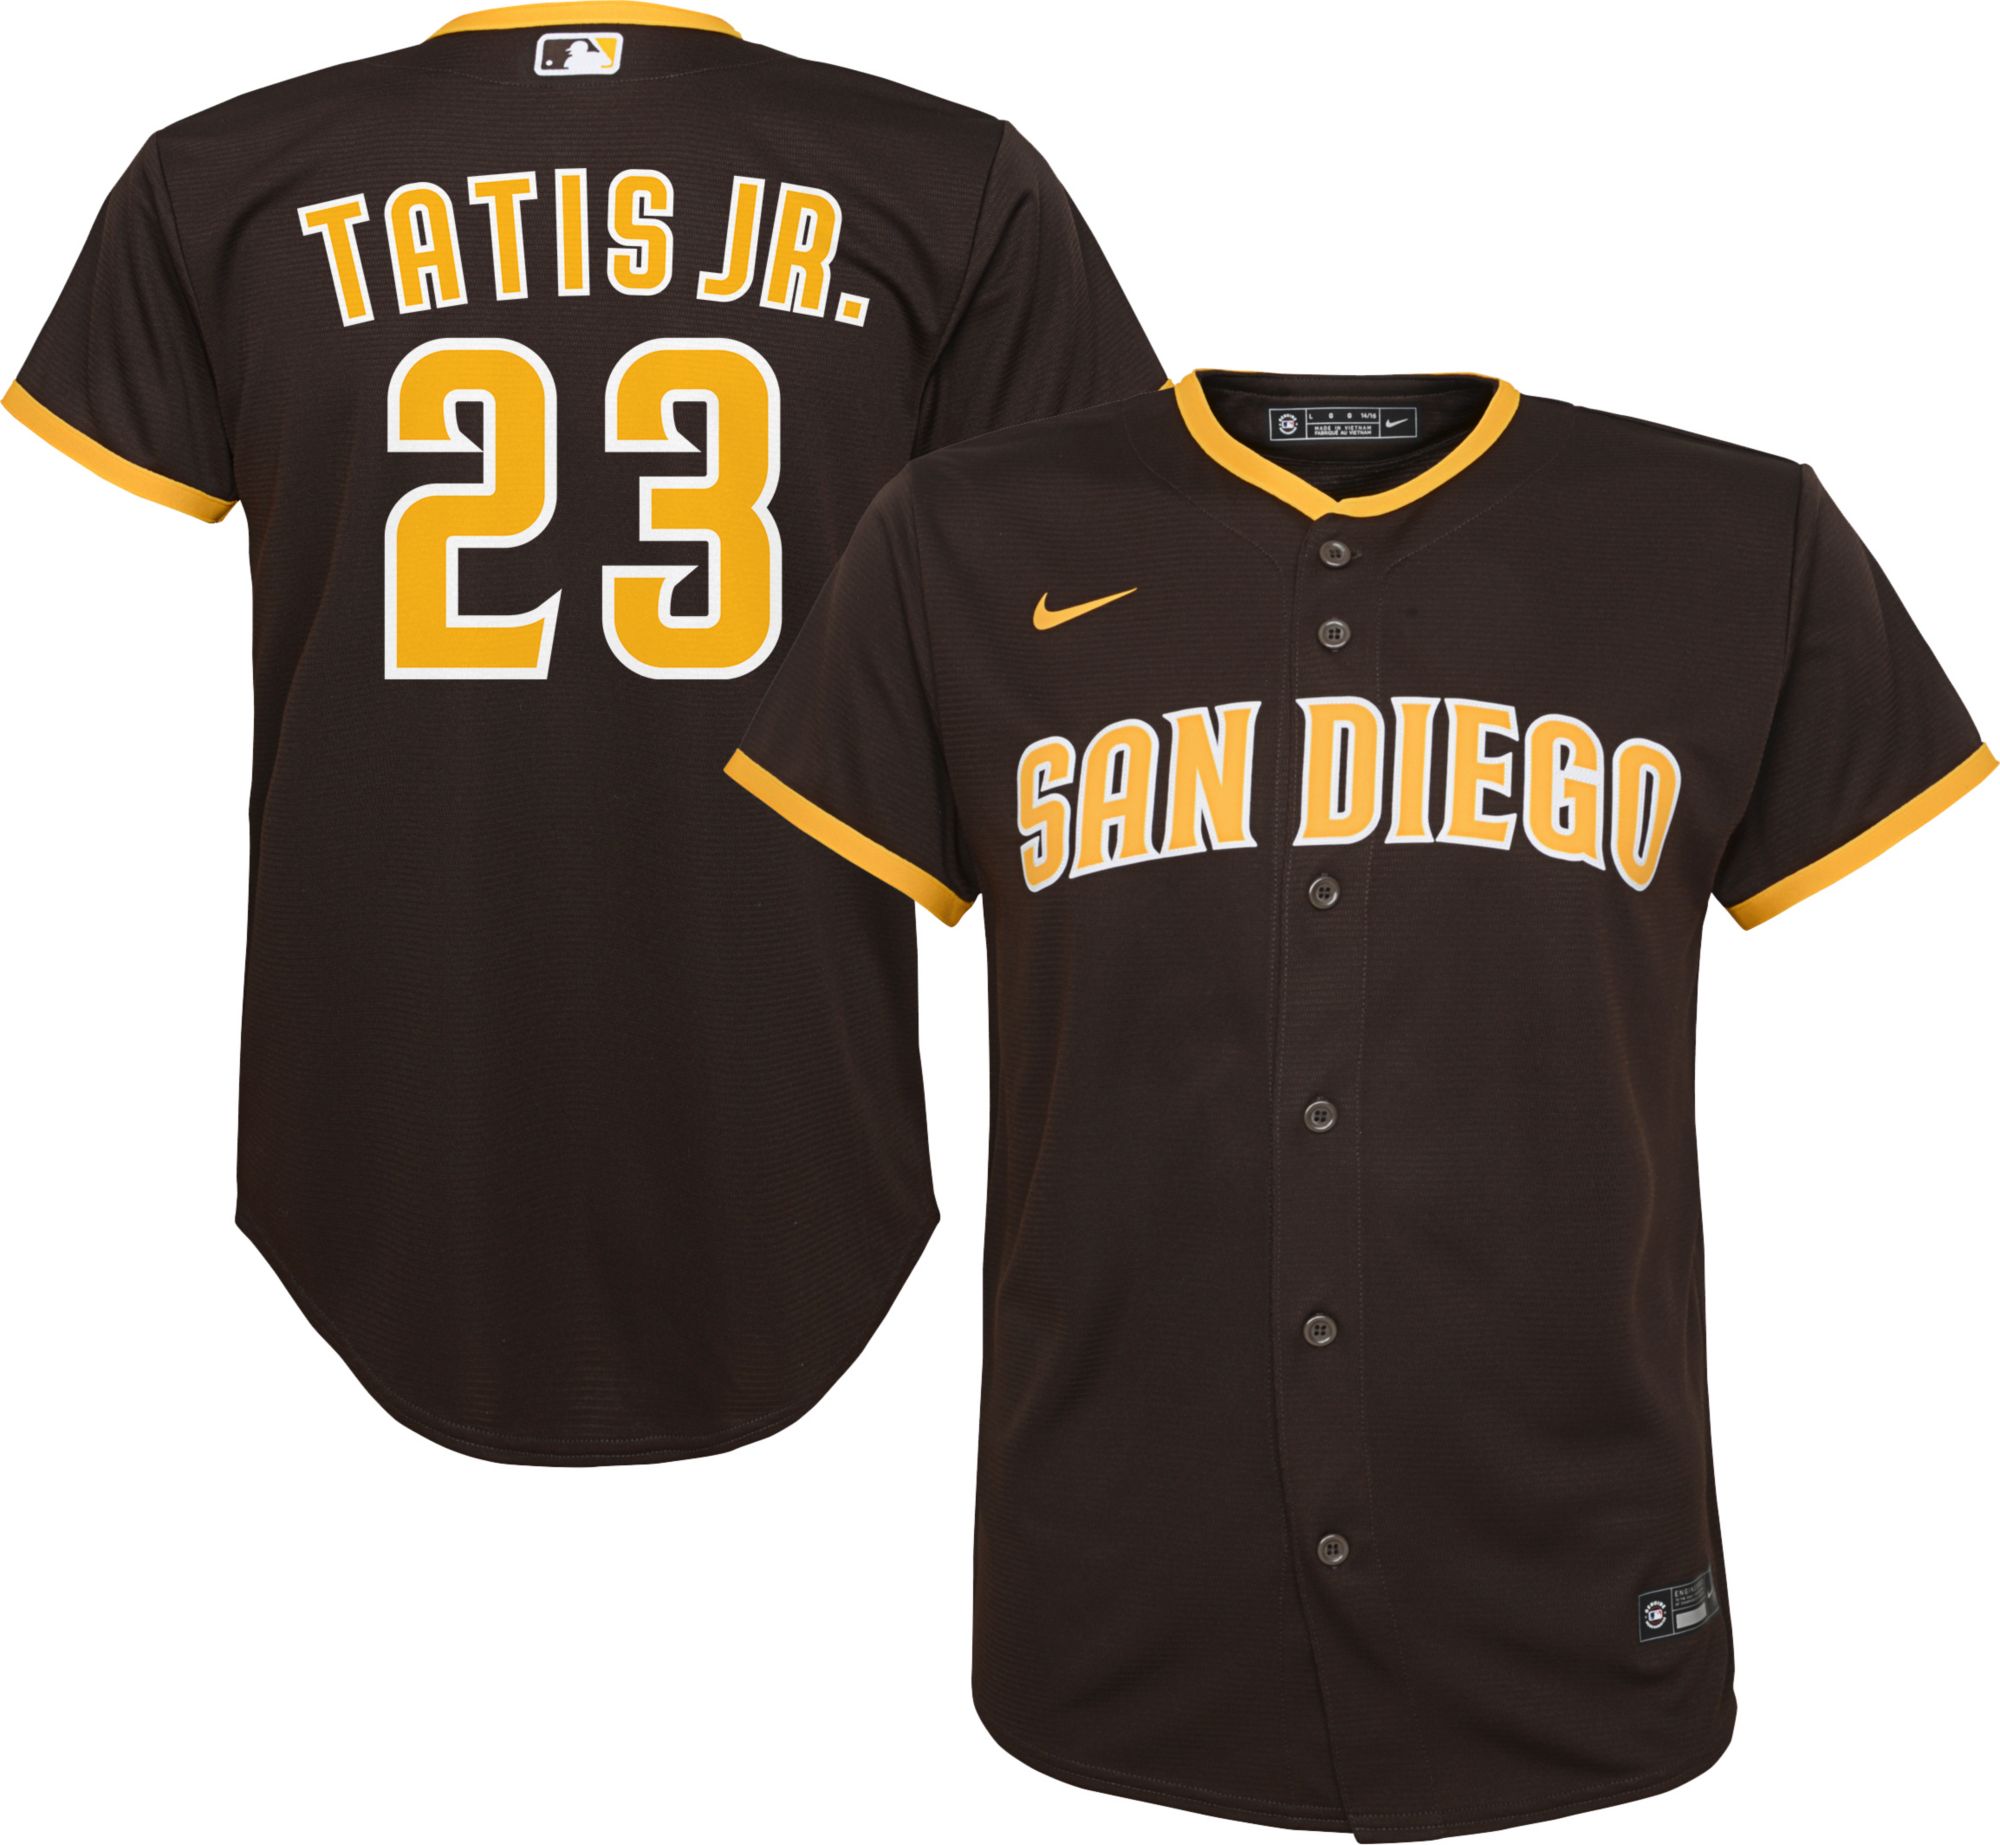 San Diego Padres Tatis Jr Youth Baseball Jersey for Sale in San Diego, CA -  OfferUp